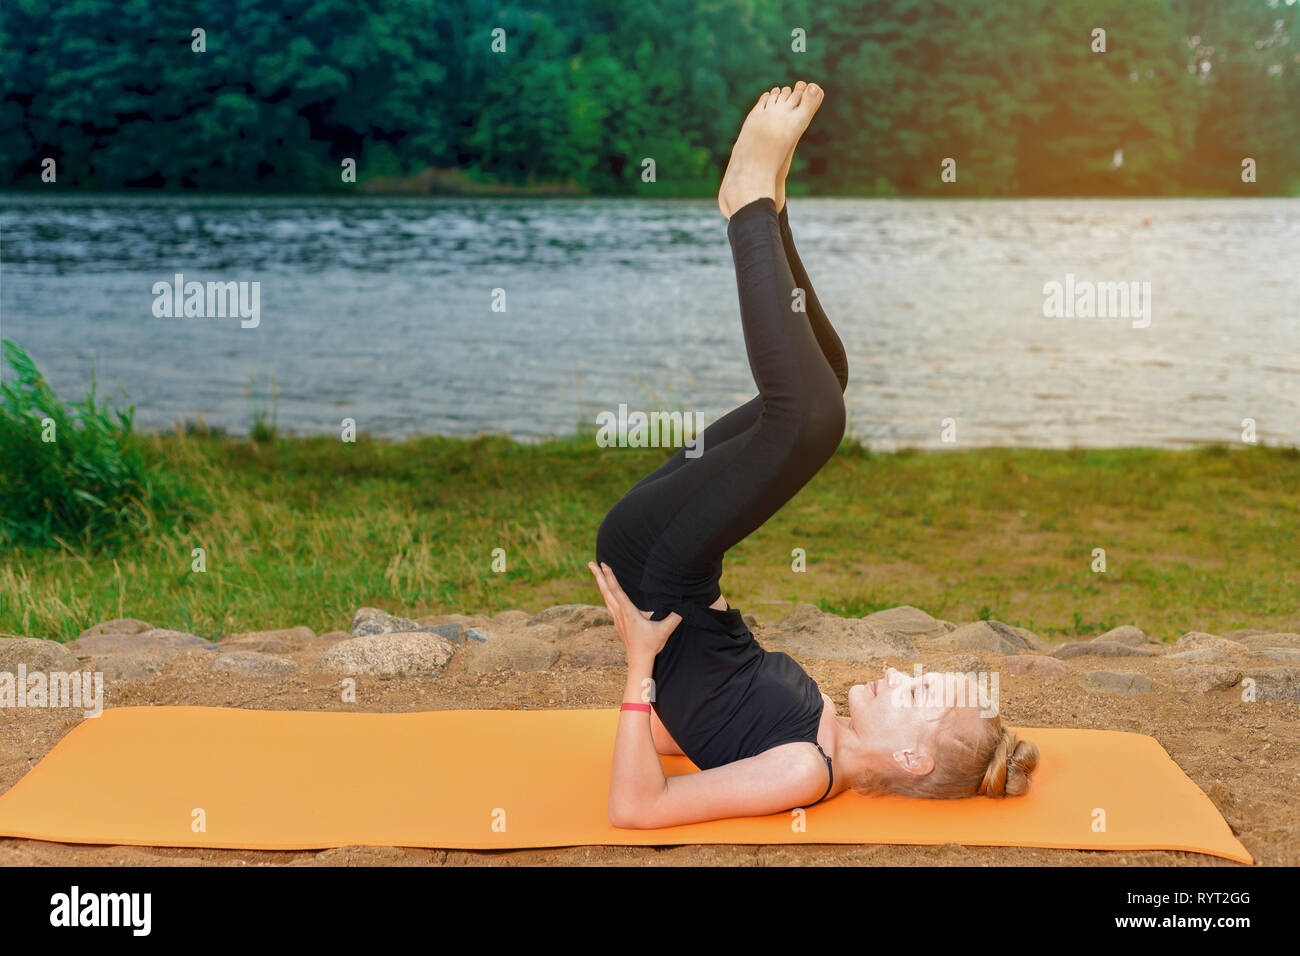 Blonde girl in yoga pants Little Girl Blonde In Leggings And T Shir Is Engaged In Yoga Pilates On The River Bank At Sunset On An Orange Mat Stock Photo Alamy